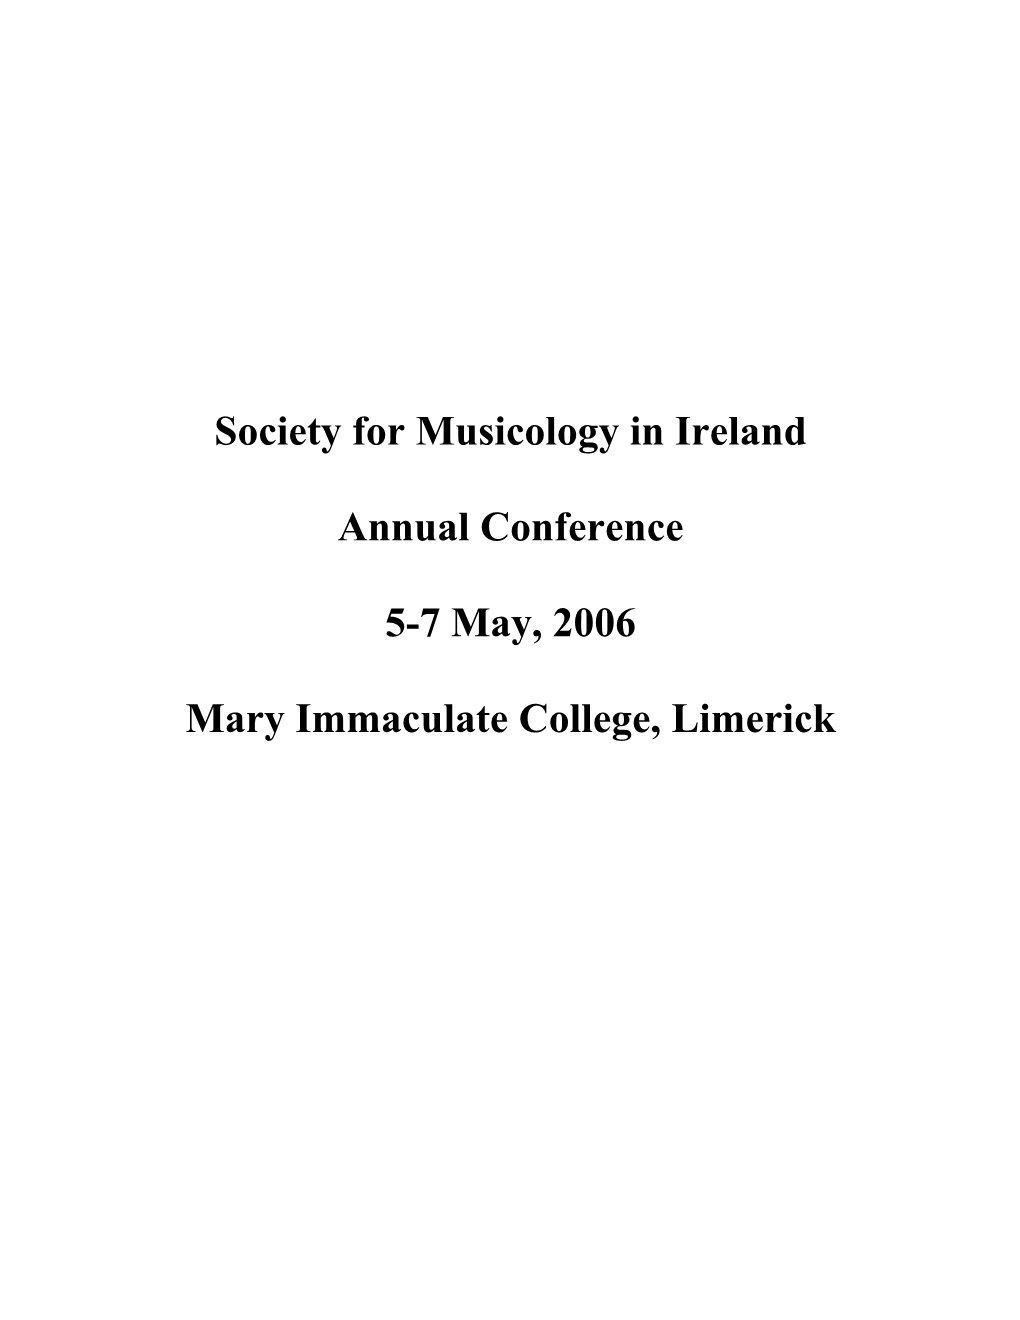 Society for Musicology in Ireland Annual Conference 5-7 May, 2006